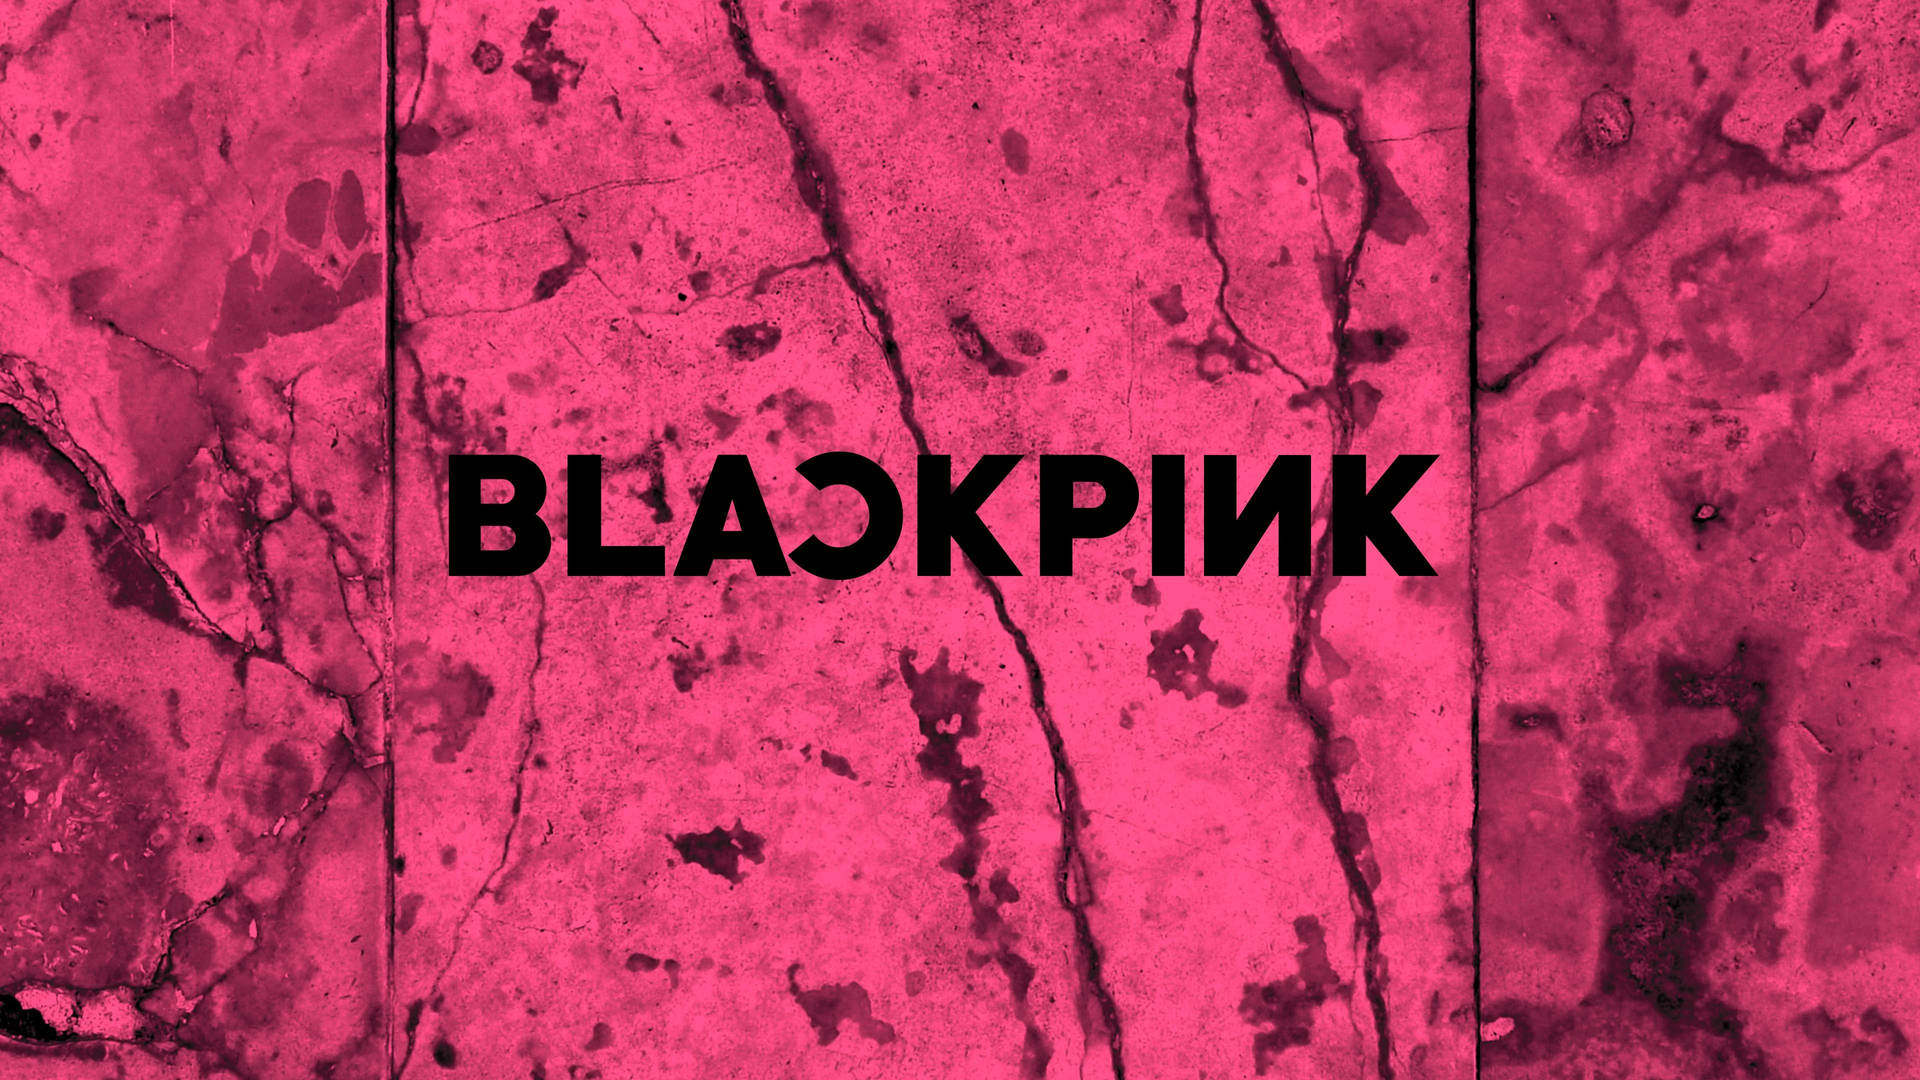 Blackpink Logo On Cool Pink Wall Background